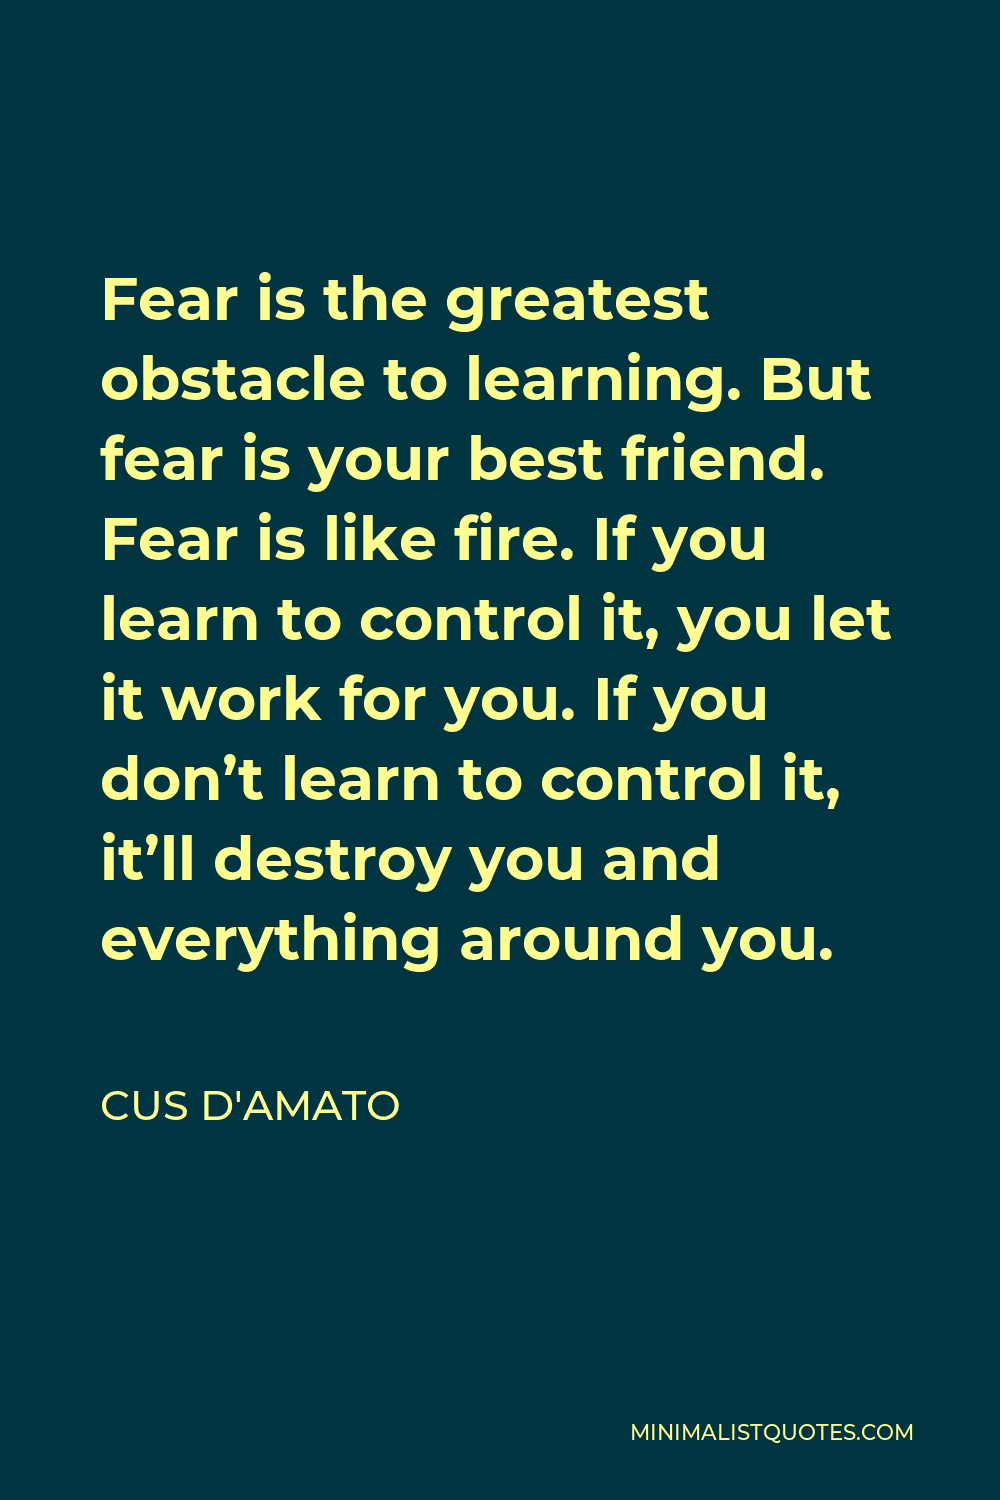 Cus D'Amato Quote - Fear is the greatest obstacle to learning. But fear is your best friend. Fear is like fire. If you learn to control it, you let it work for you. If you don’t learn to control it, it’ll destroy you and everything around you.